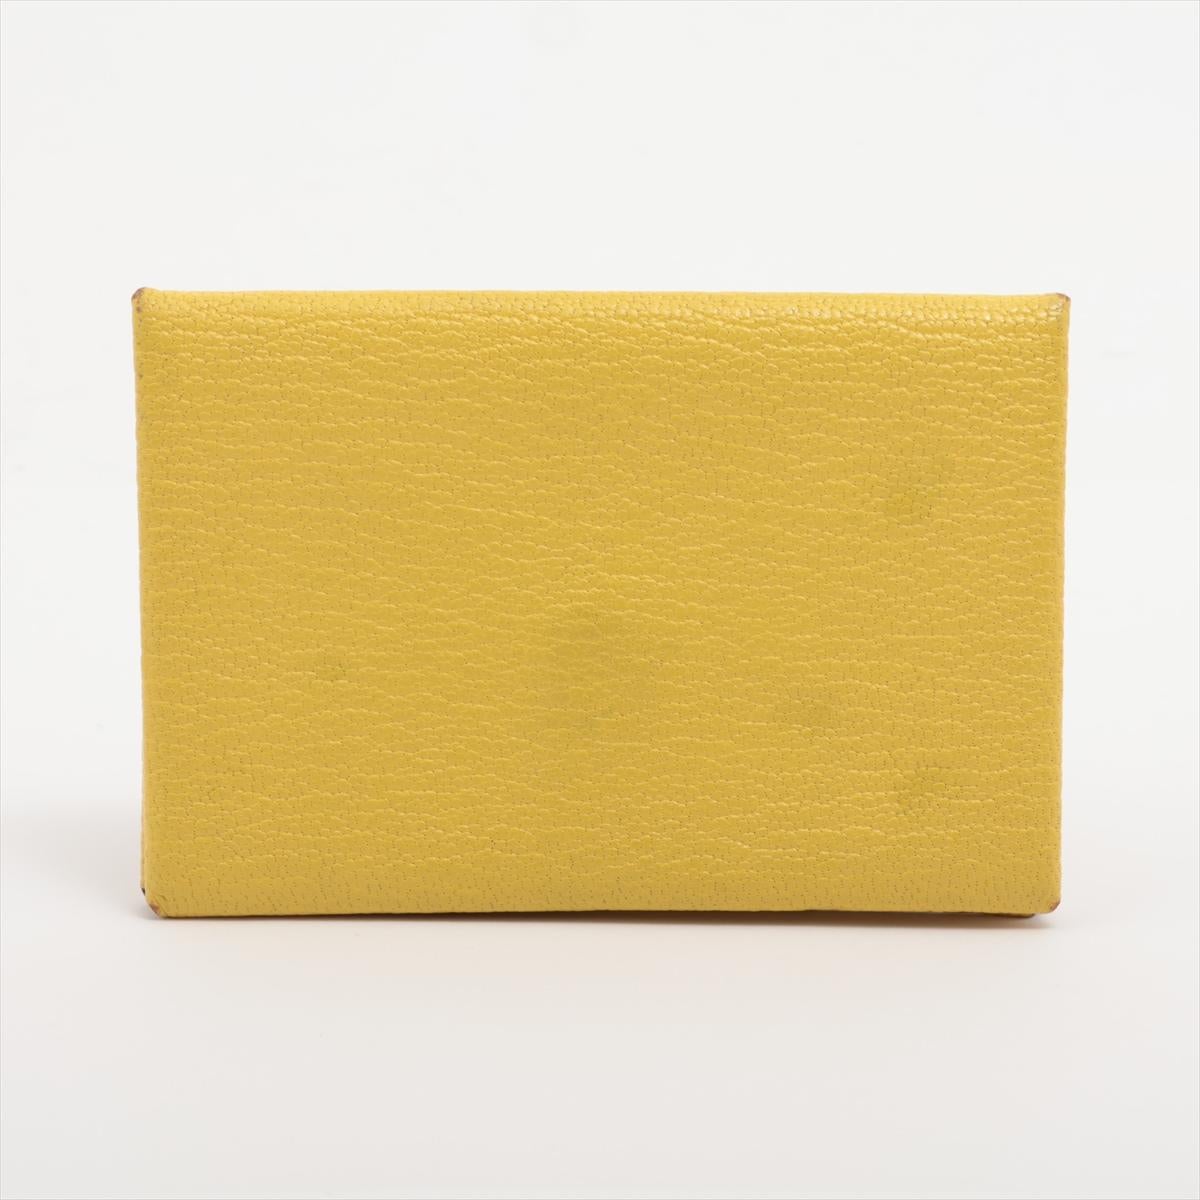 The Hermès Calvi Card Holder in Limoncello is a chic and vibrant accessory that exudes luxury and style. Crafted from high-quality Epsom leather, known for its durability and distinctive texture, the card holder features a striking Limoncello hue